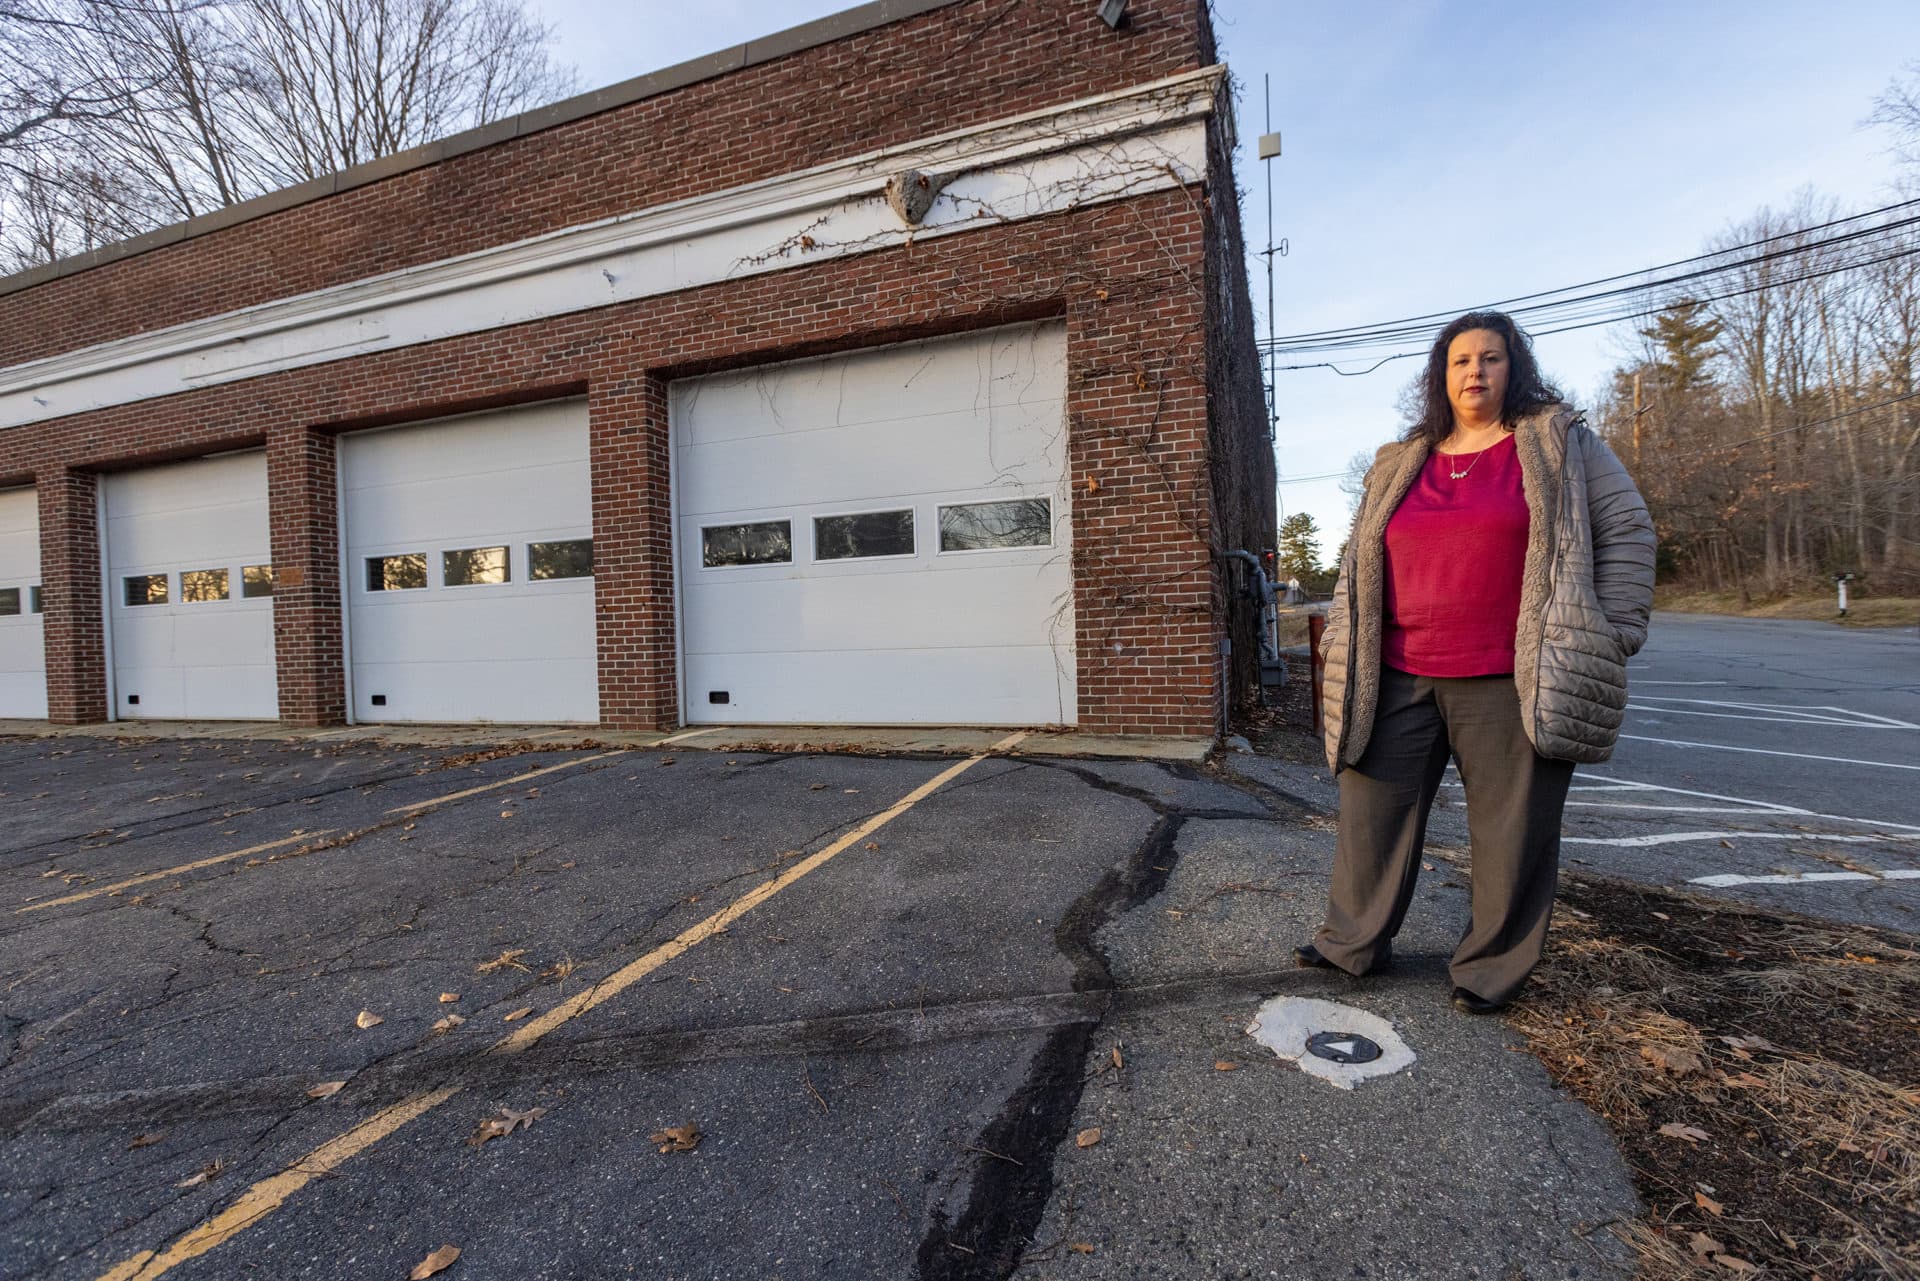 Stow Town Administrator Denise Dembroski, stands in front of the old Stow fire station, the origin of some PFAS contamination in the town center. (Jesse Costa/WBUR)